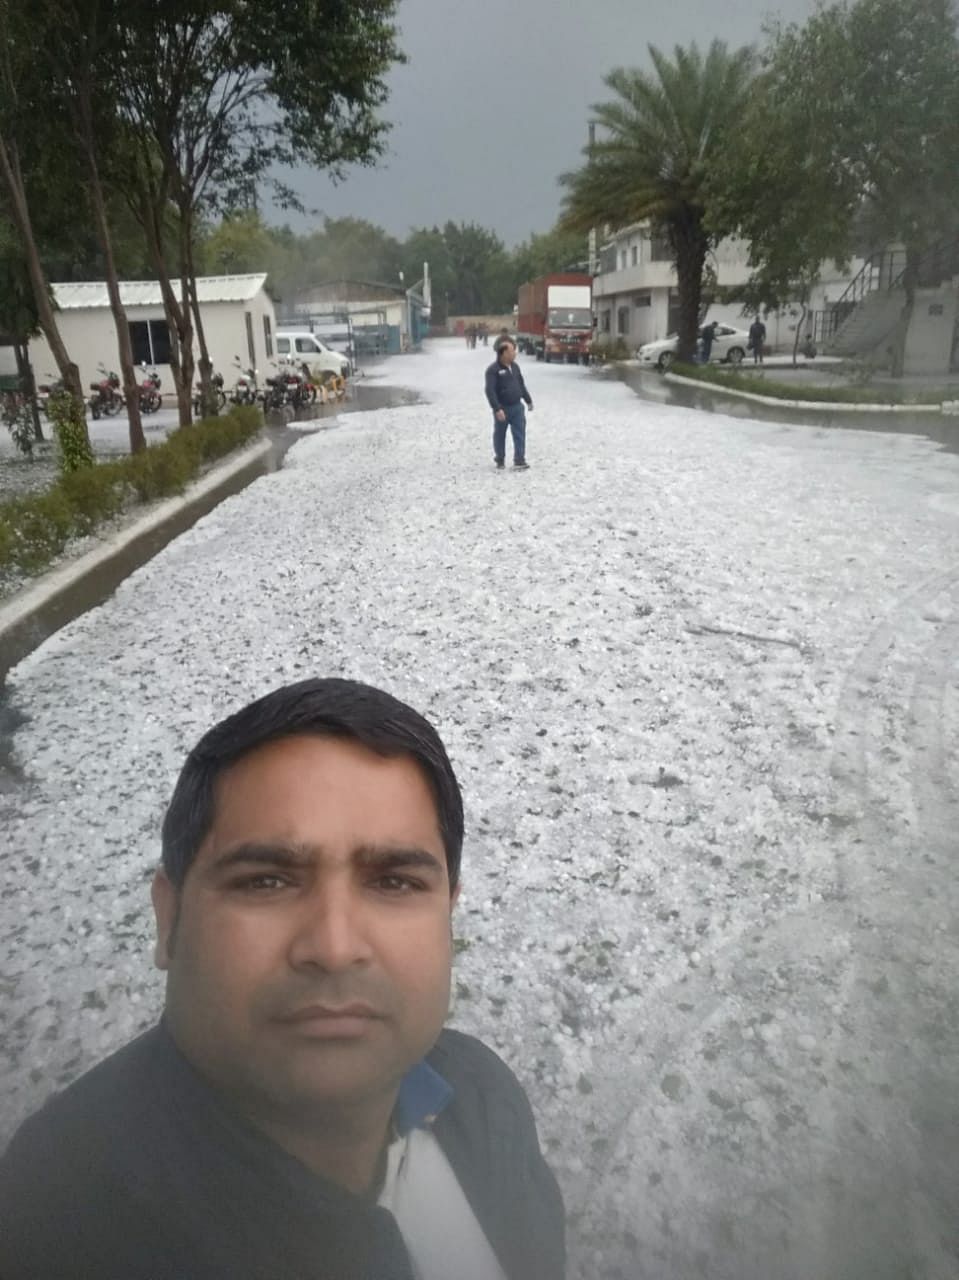 Share your hailstorm photos with us.